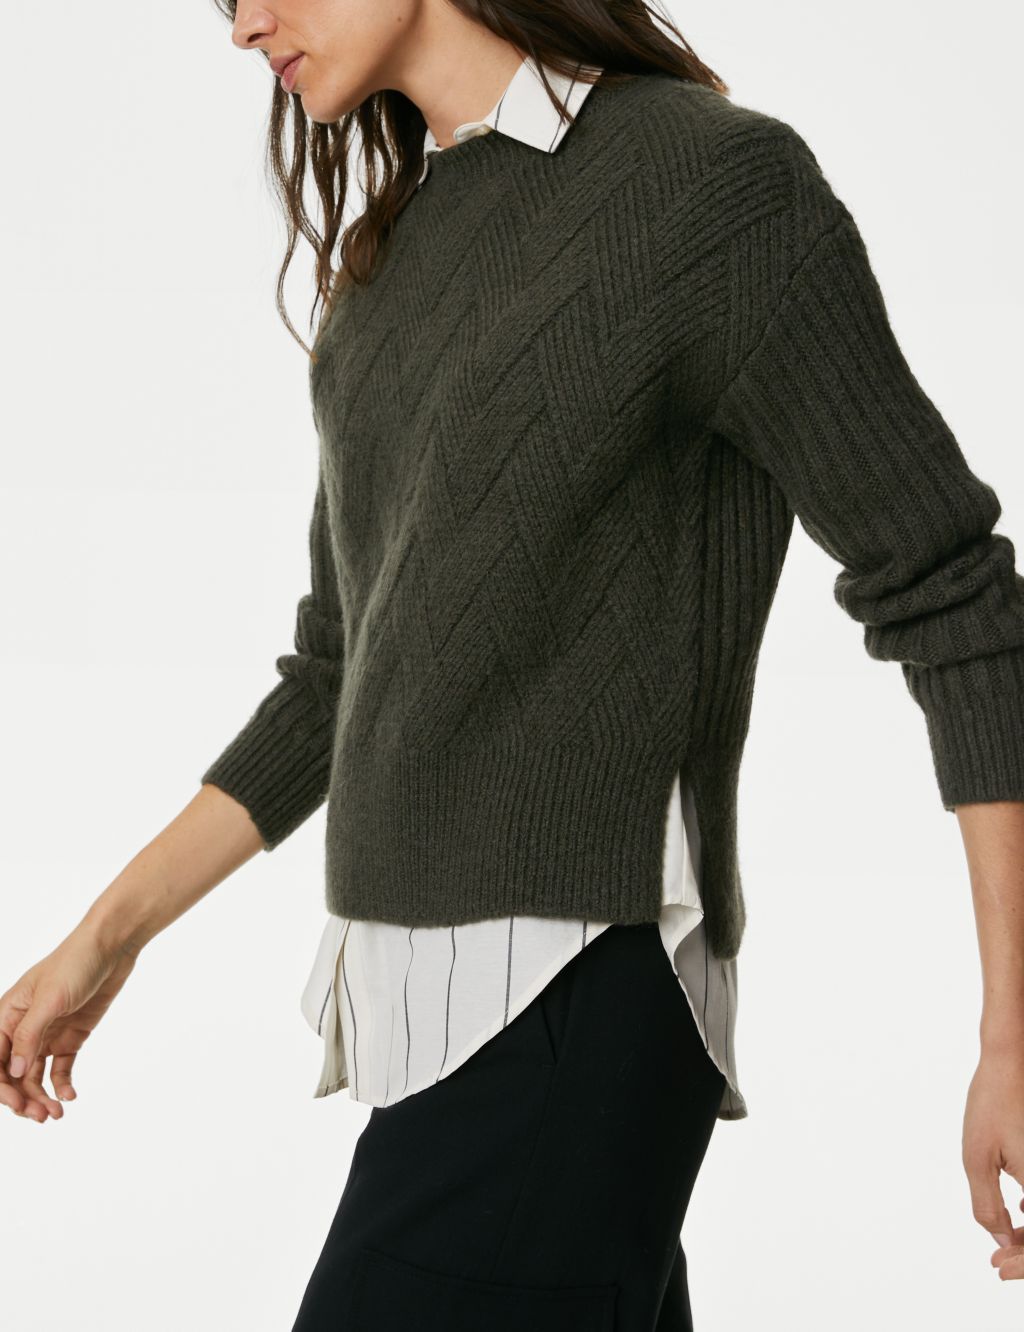 Textured Crew Neck Jumper with Wool image 4